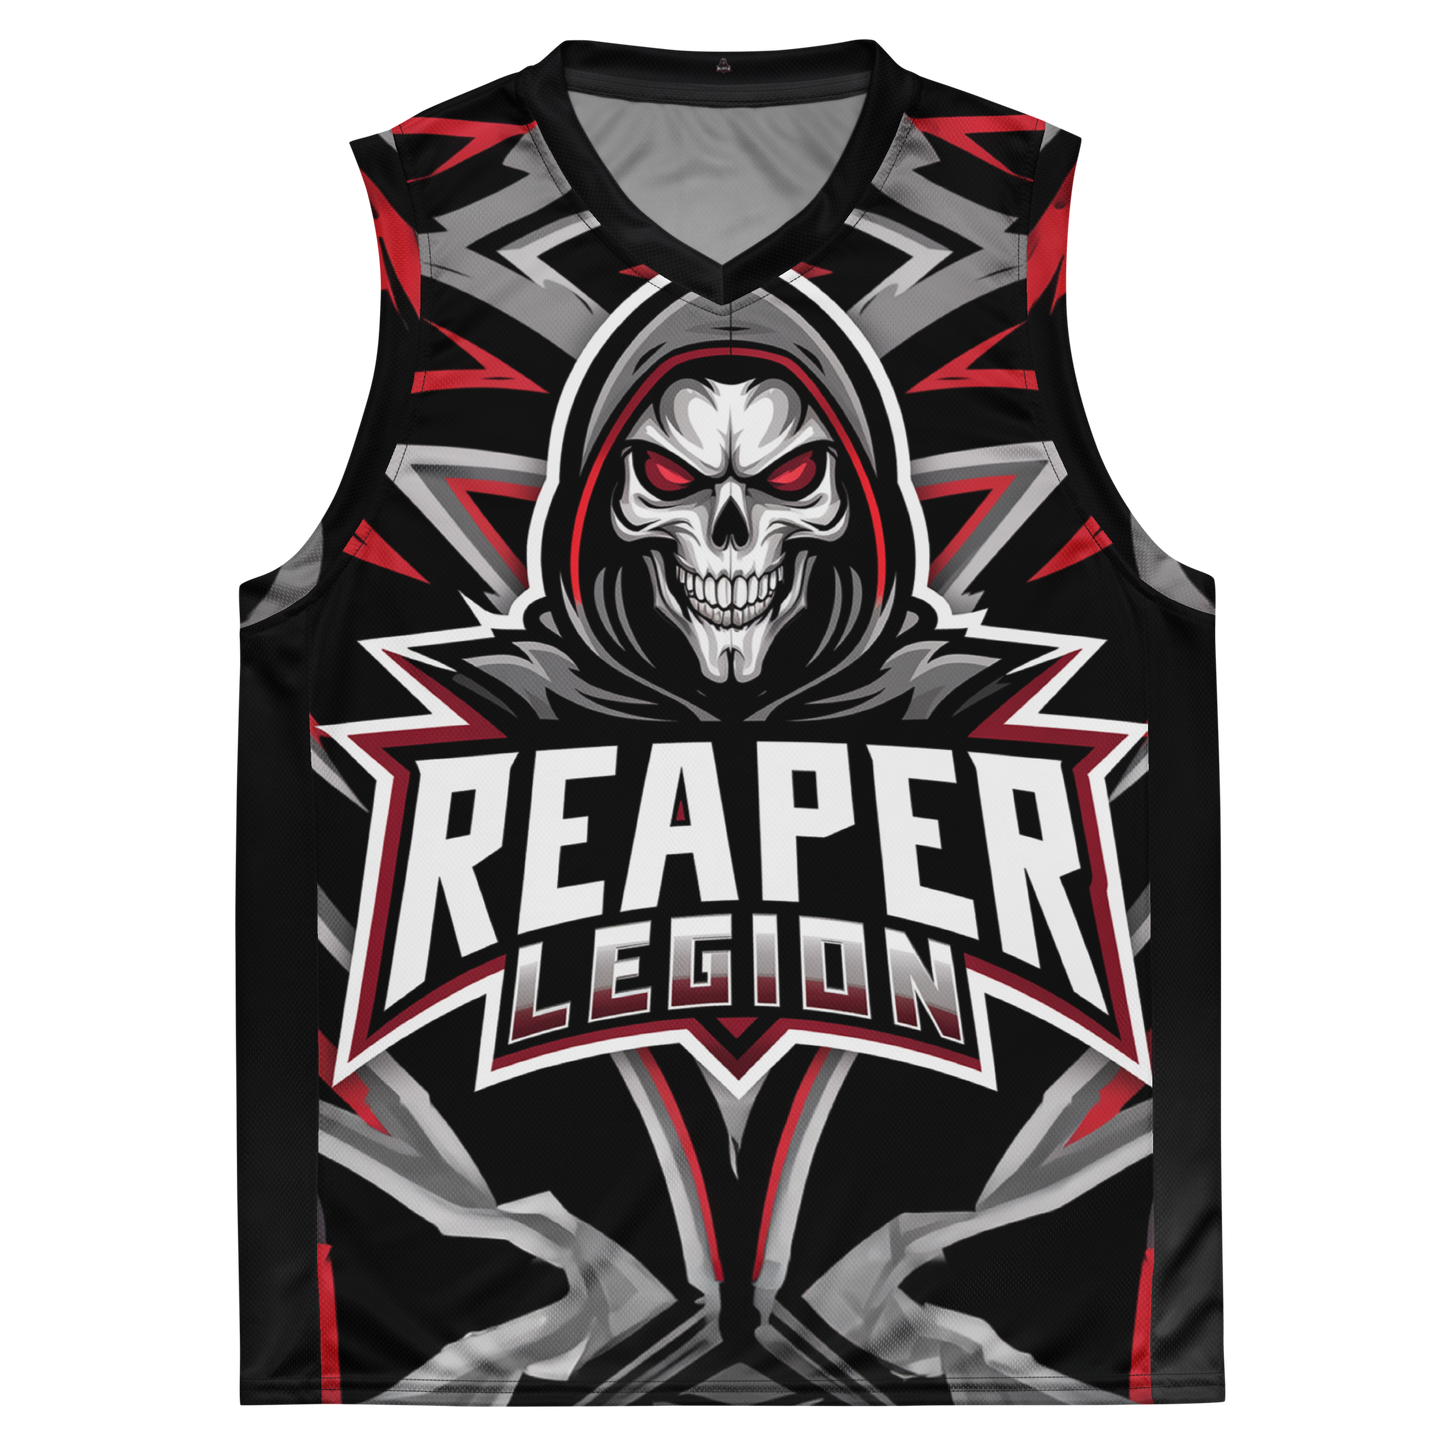 "Team Reaper" Recycled unisex basketball jersey